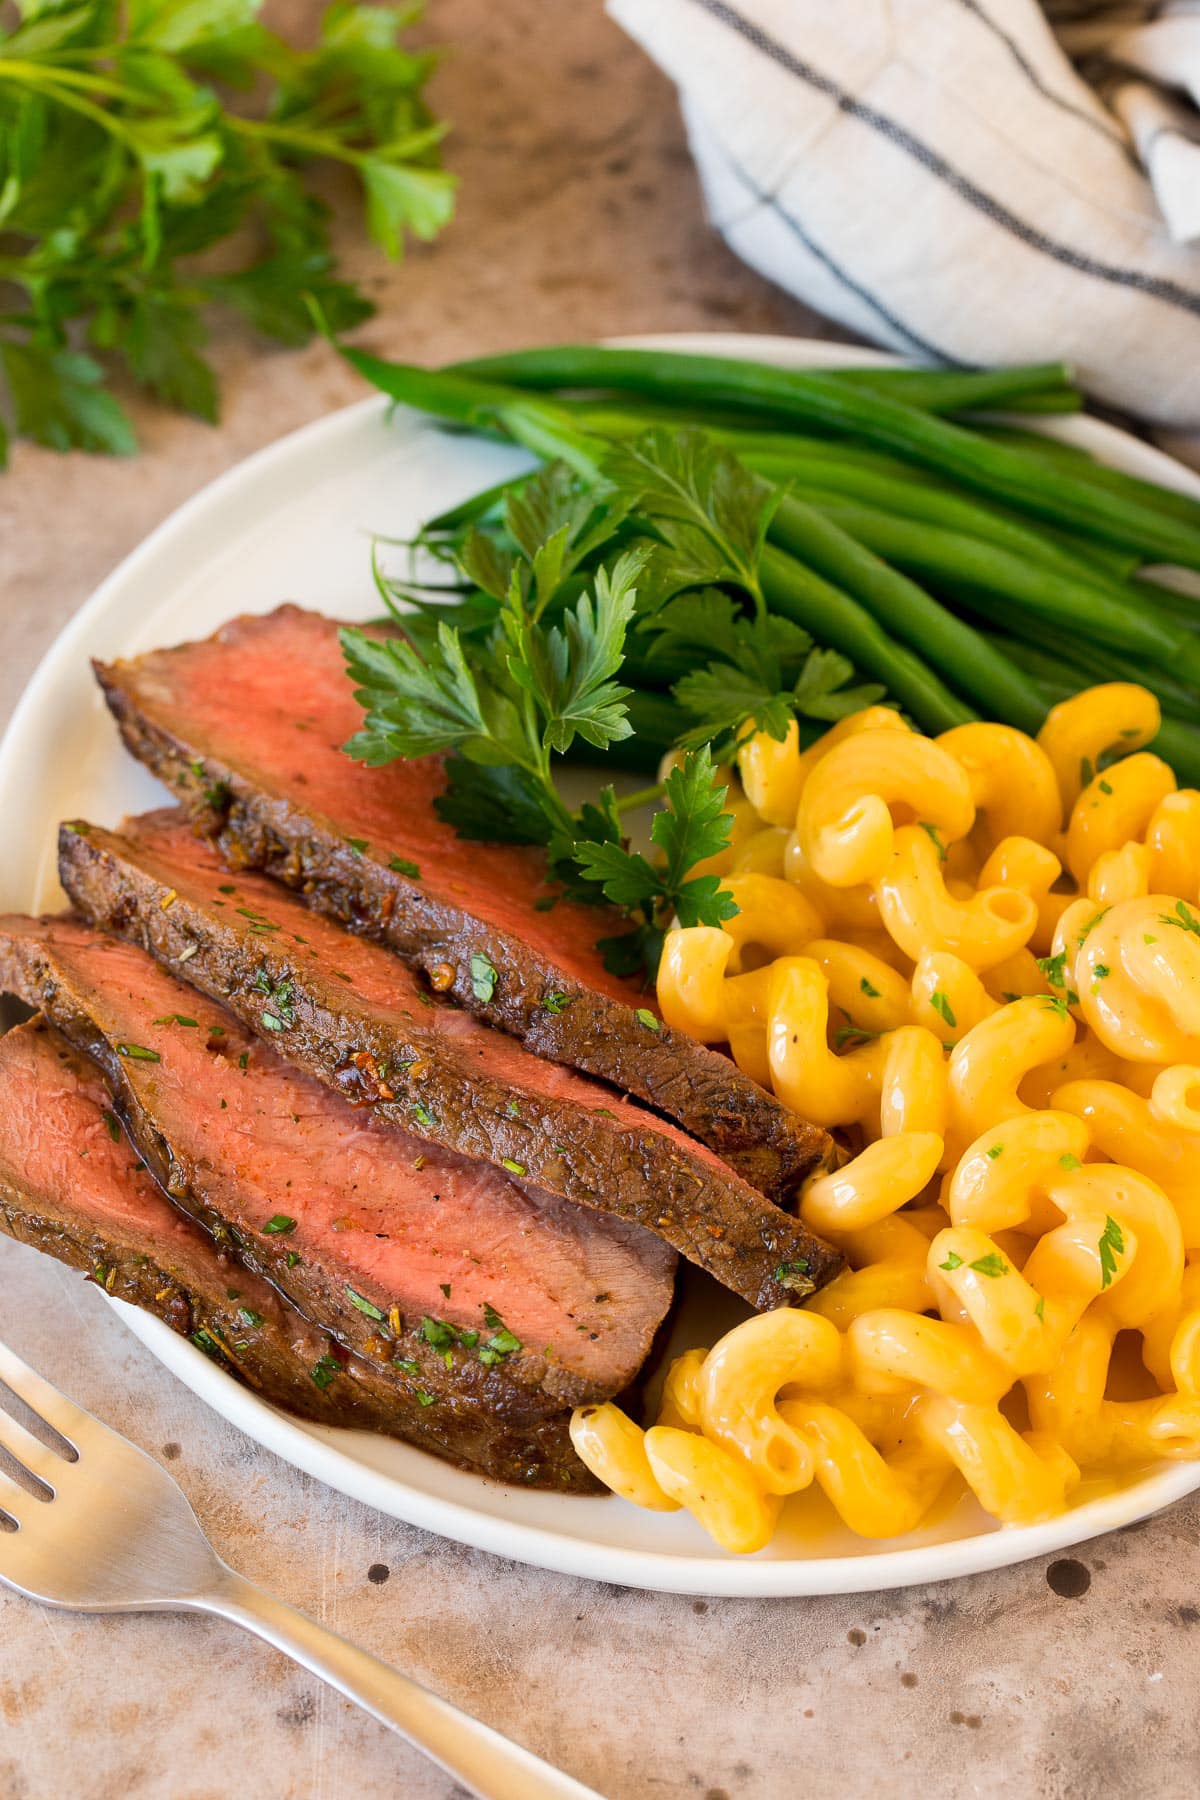 Sliced London broil served with mac and cheese and green beans.